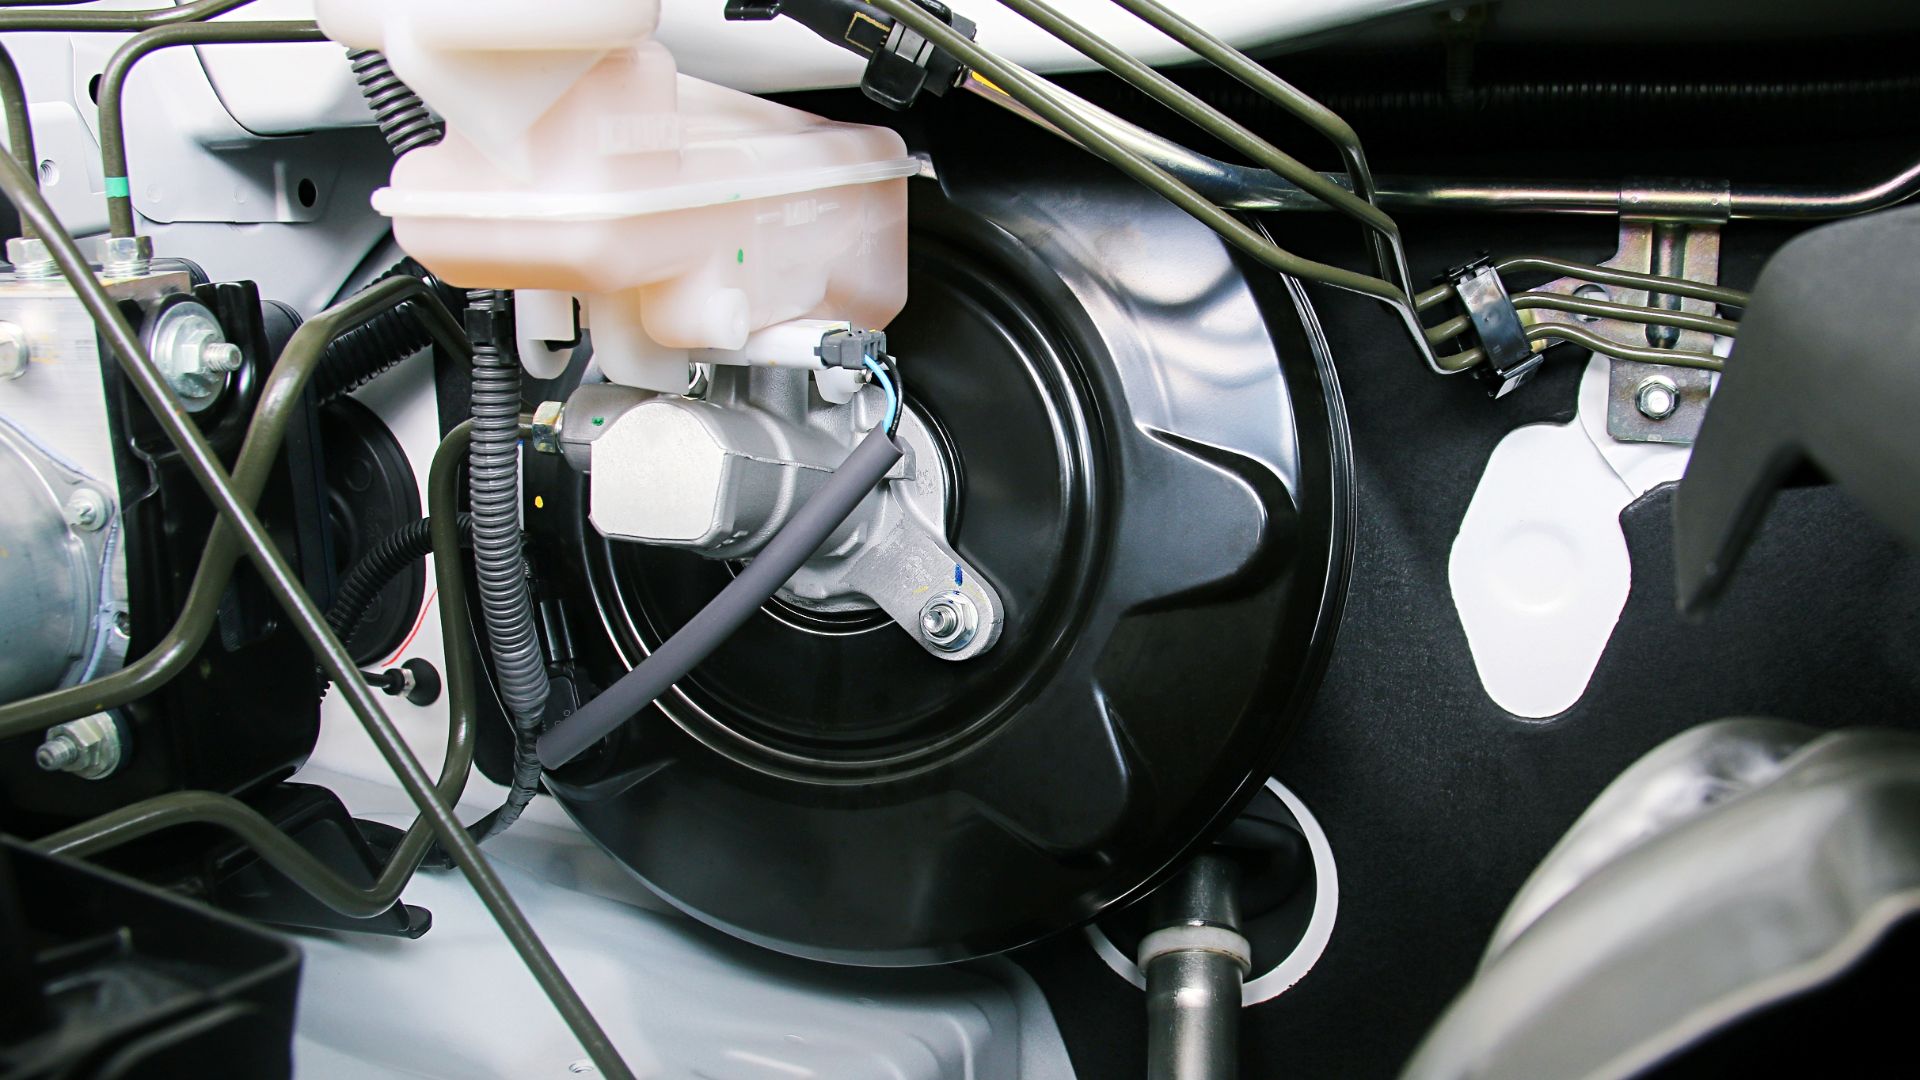 a close up of a motorcycle engine with a fuel tank.